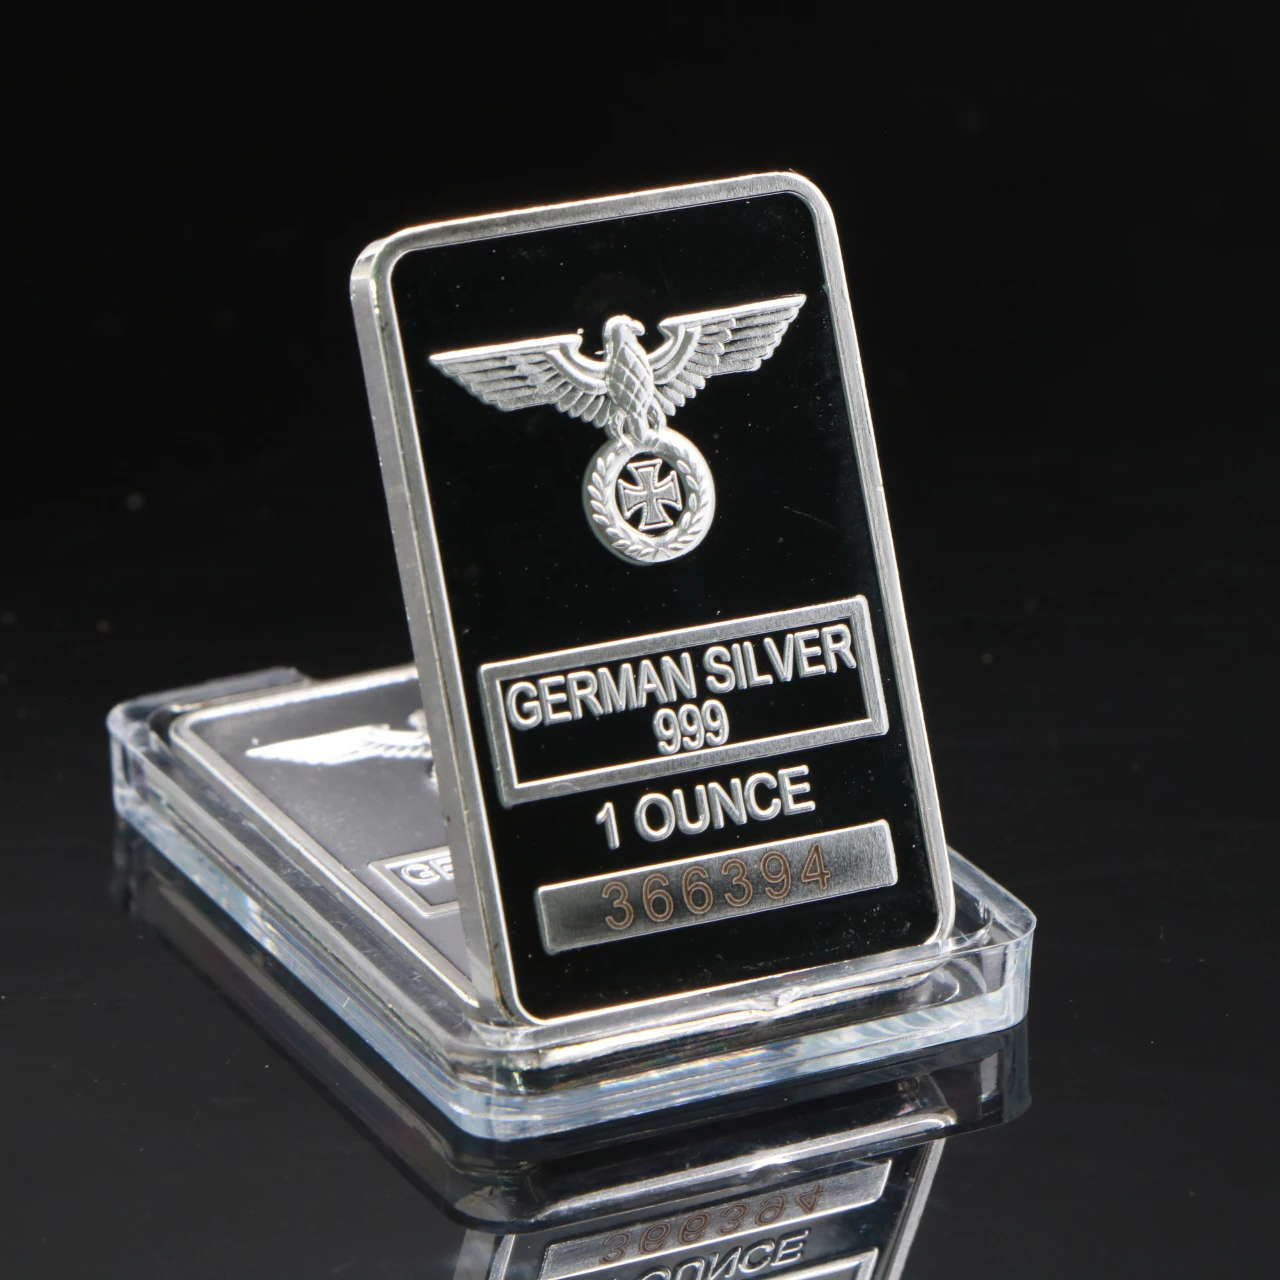 German Eagle Rare 1 Ounce Silver Bar 999 Silver Plated Cross Bar Clear Acrylic Capsule with different serial number